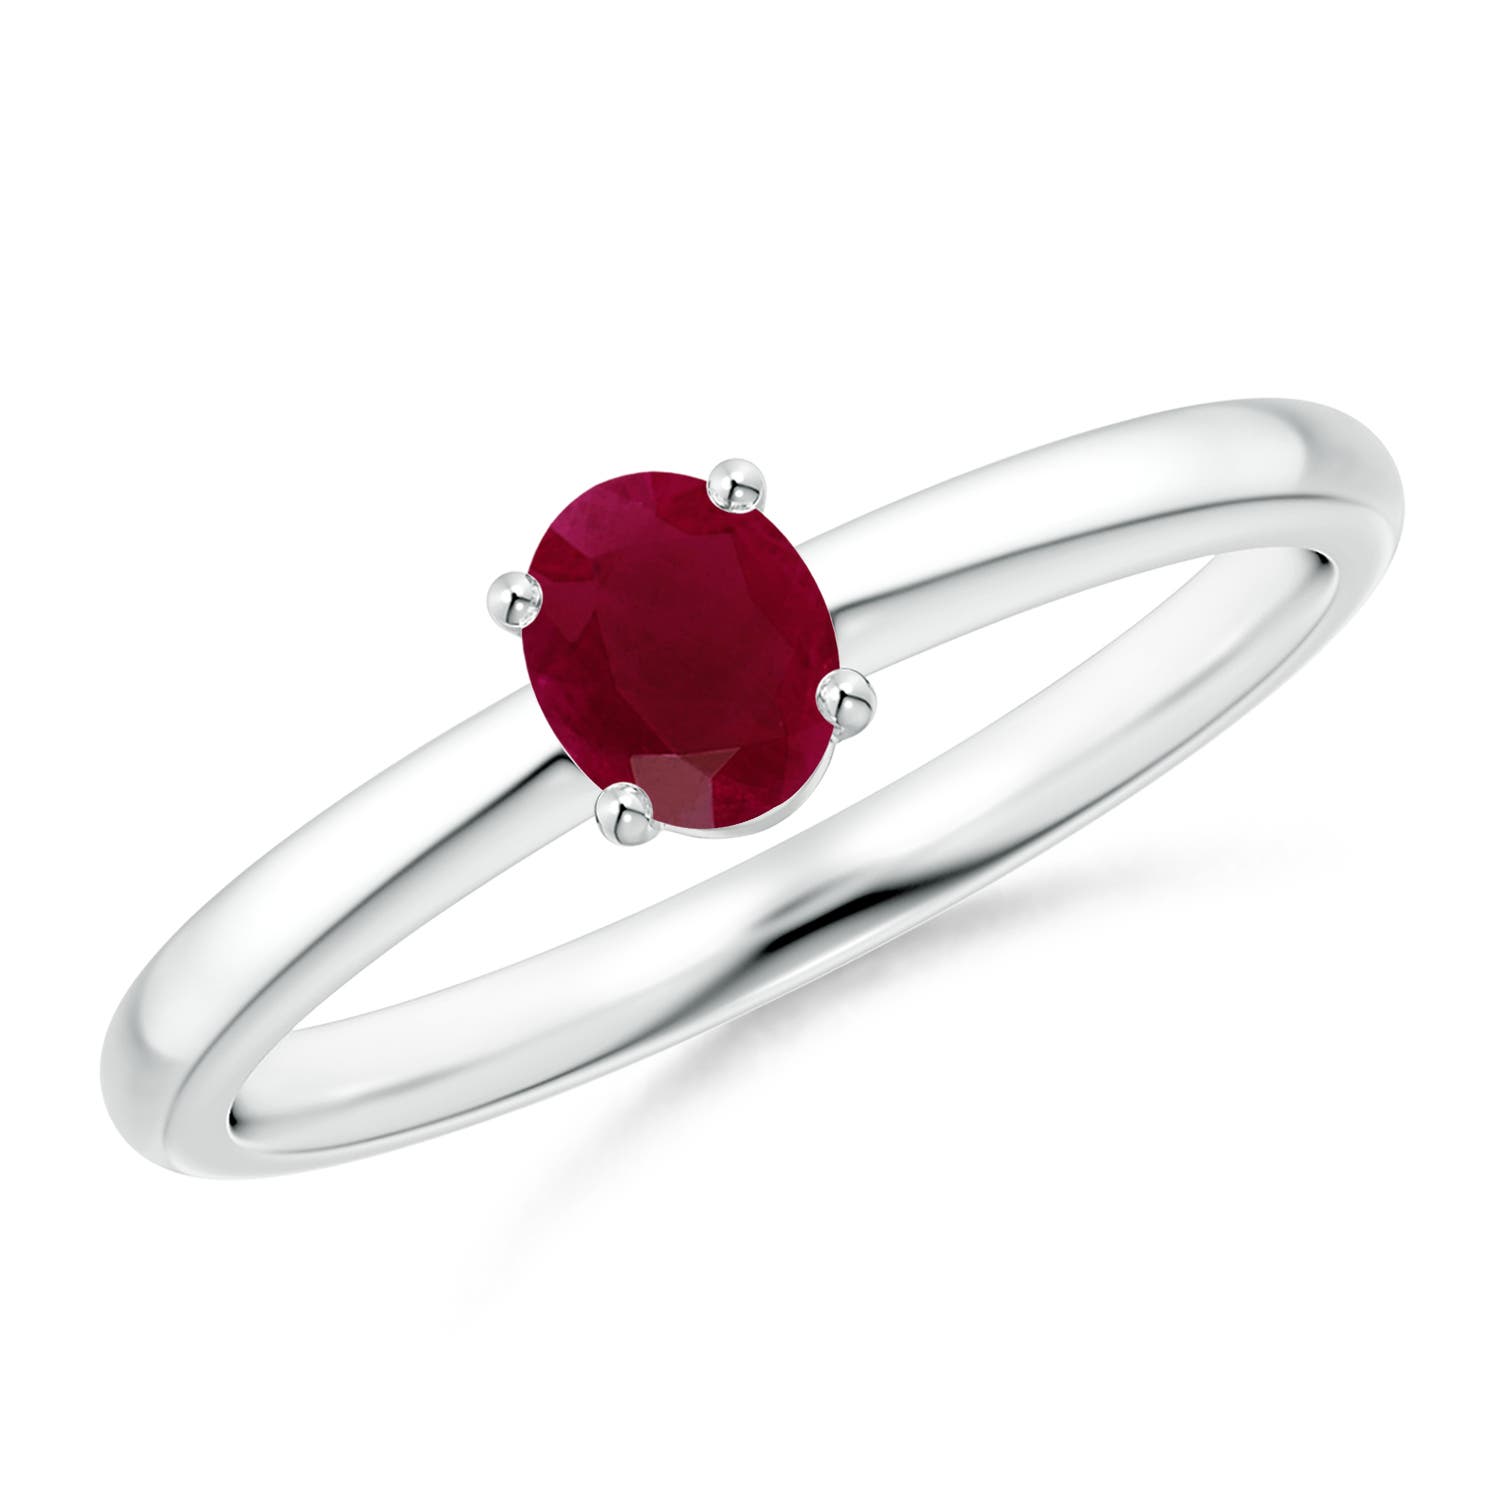 A - Ruby / 0.4 CT / 14 KT White Gold